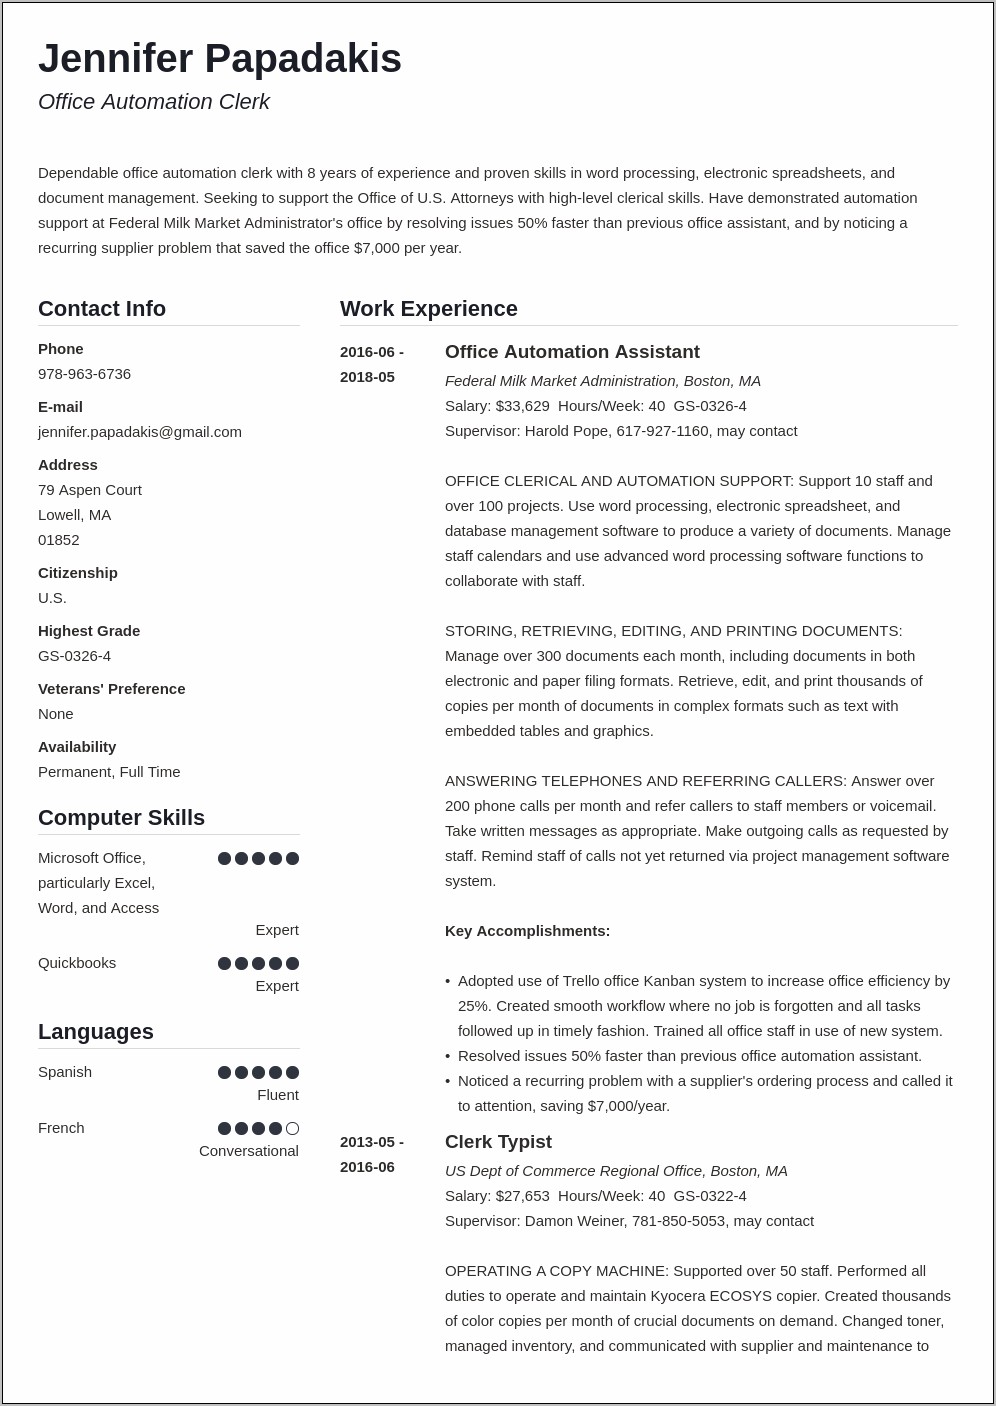 Sample Of A Federal Resume Kathryn Troutman